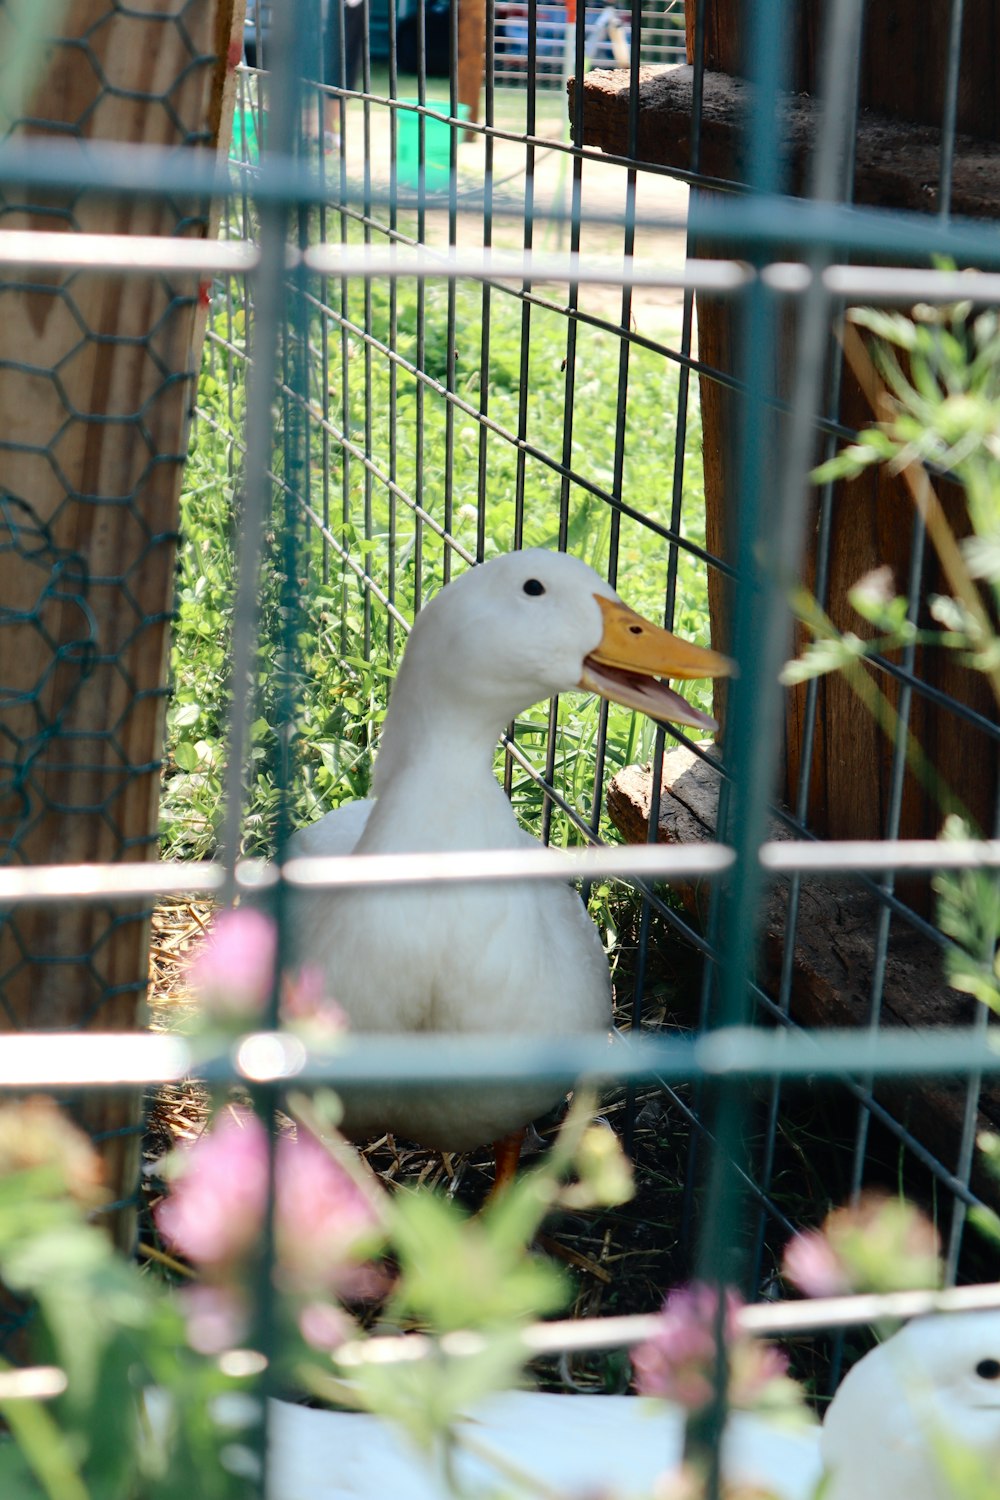 white duck in cage during daytime